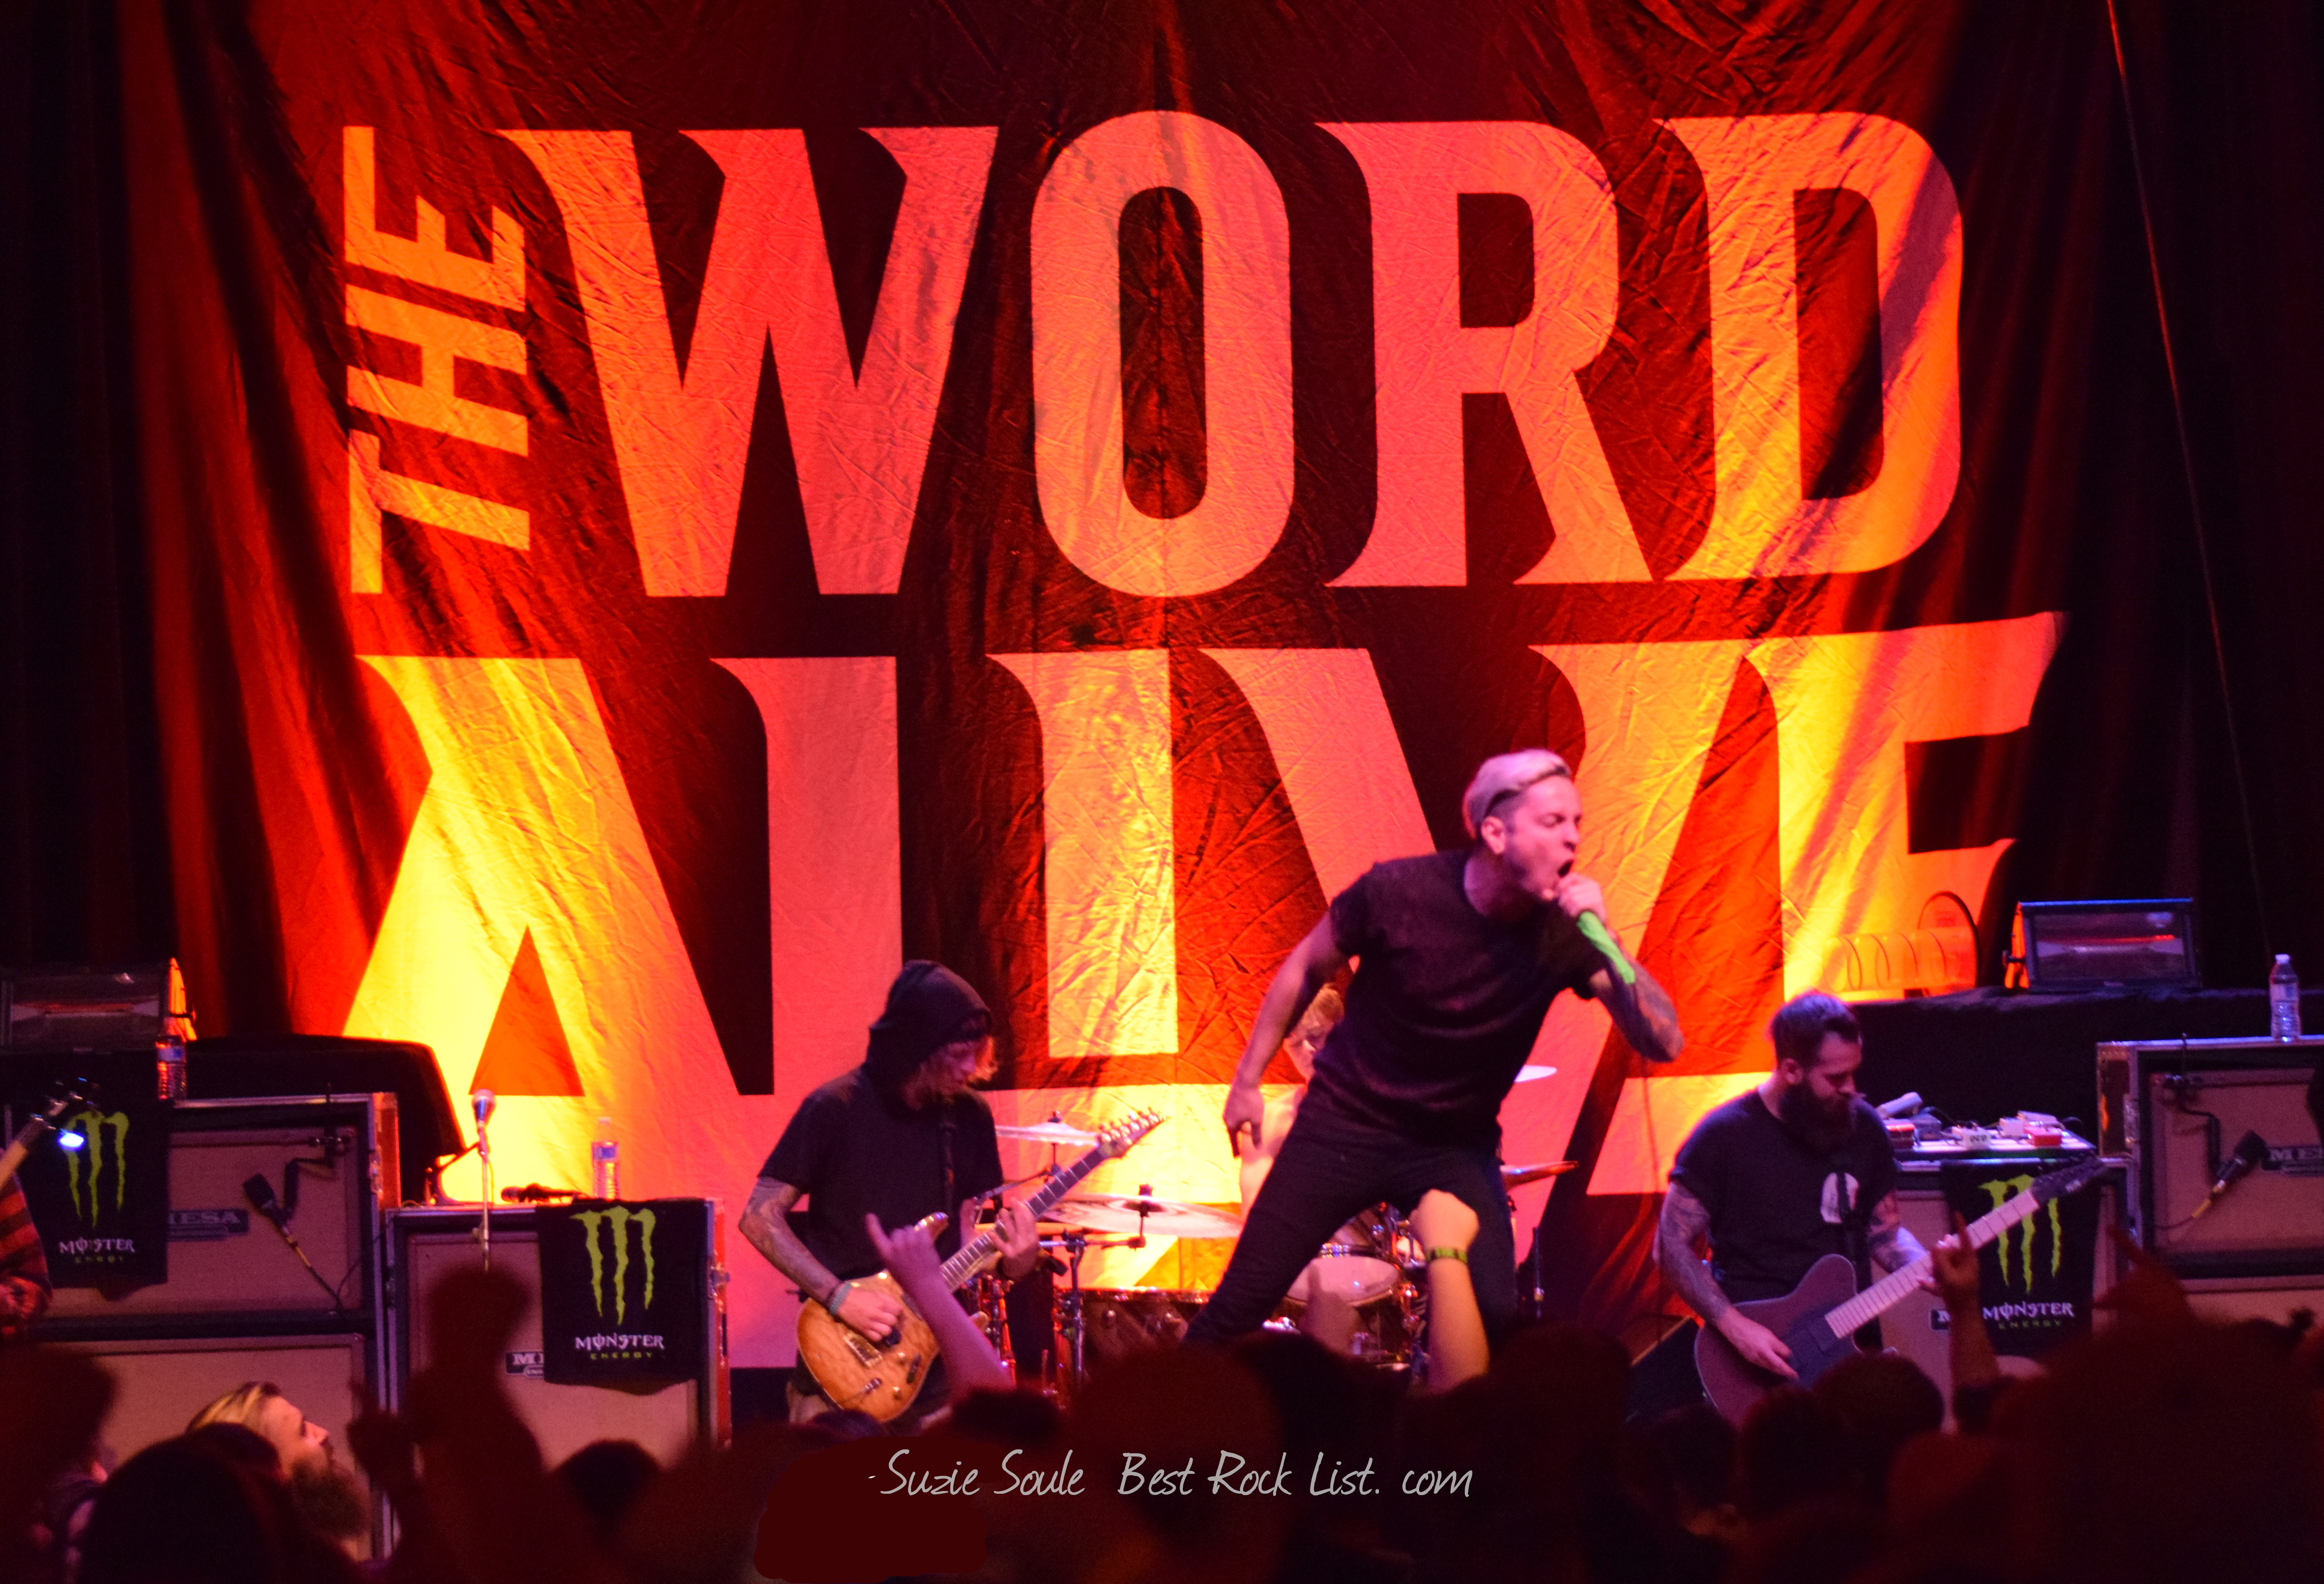 The Word Alive